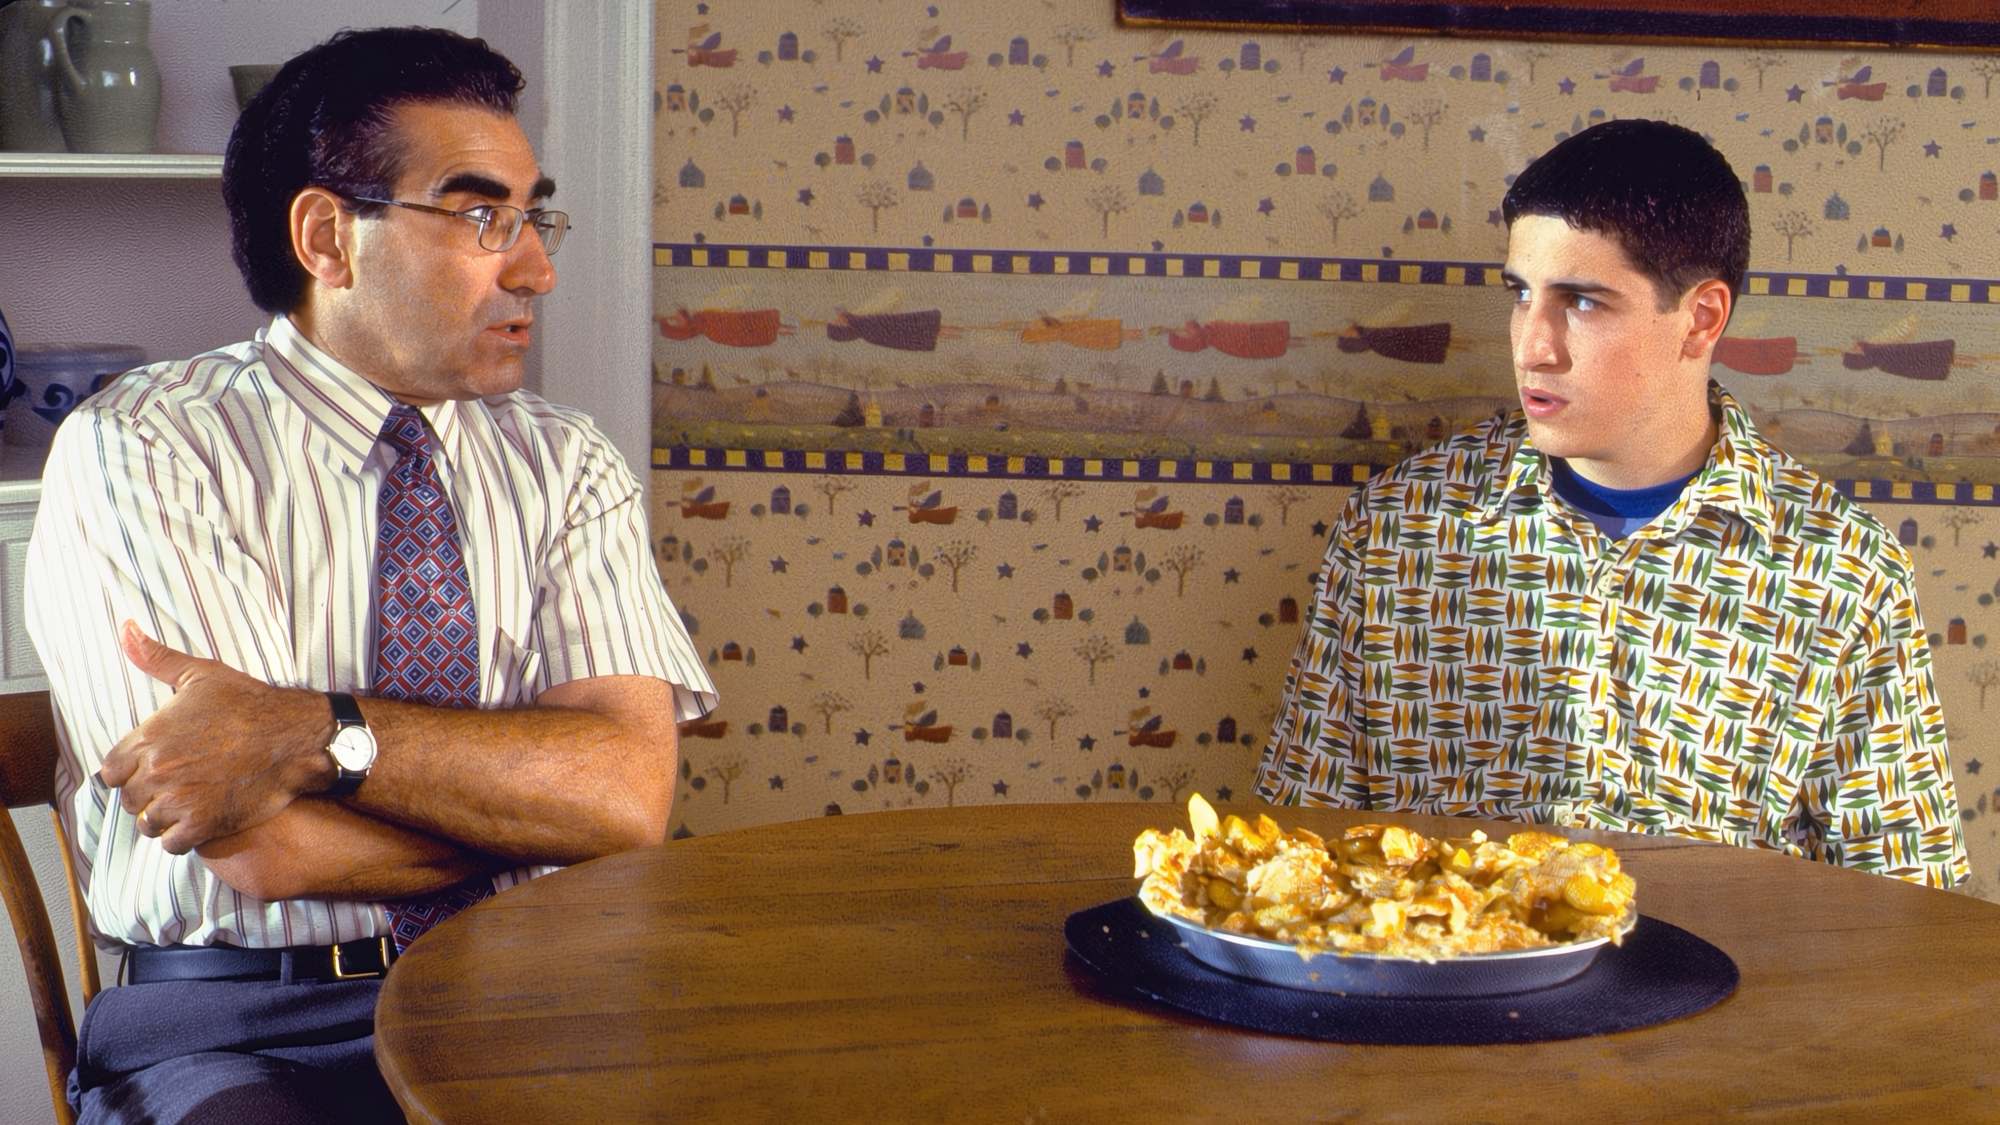 The best raunchy teen comedy just turned 25 — why ‘American Pie’ is still so sweet